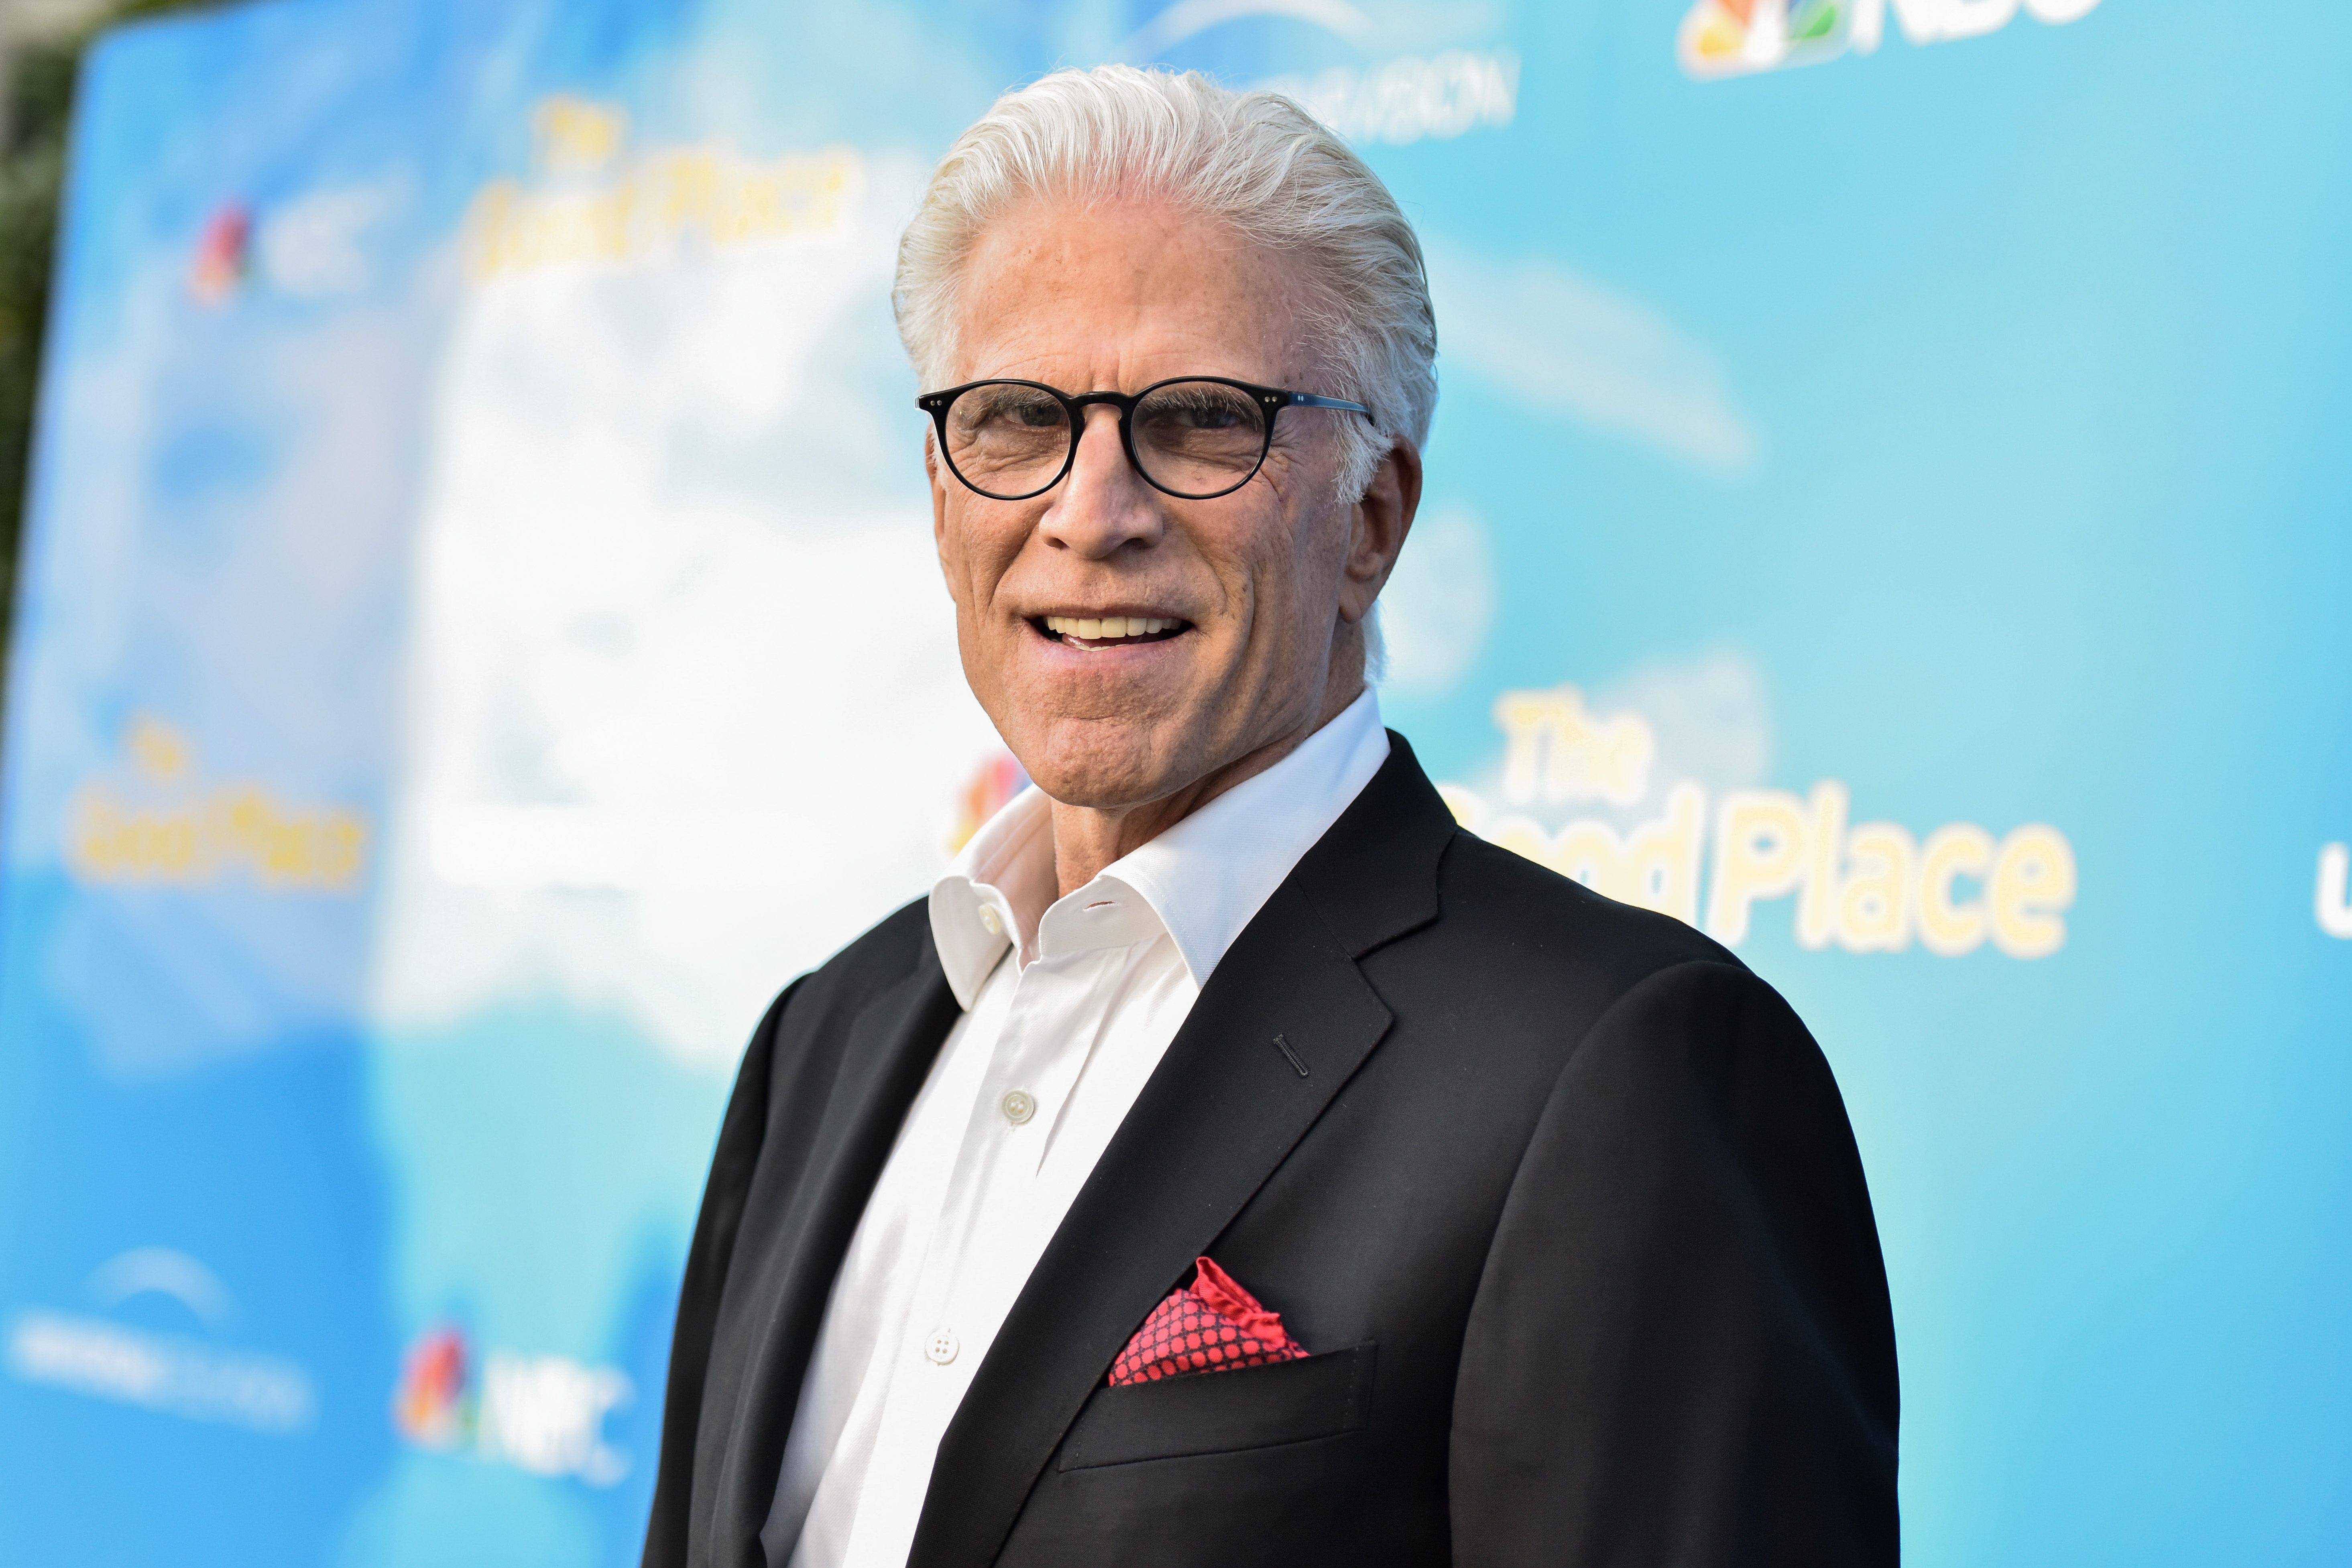 Mandatory Credit: Photo by Rob Latour/Shutterstock (10286637t) Ted Danson 'The Good Place' FYC Event, Arrivals, Saban Media Center, Los Angeles - 07 Jun 2019